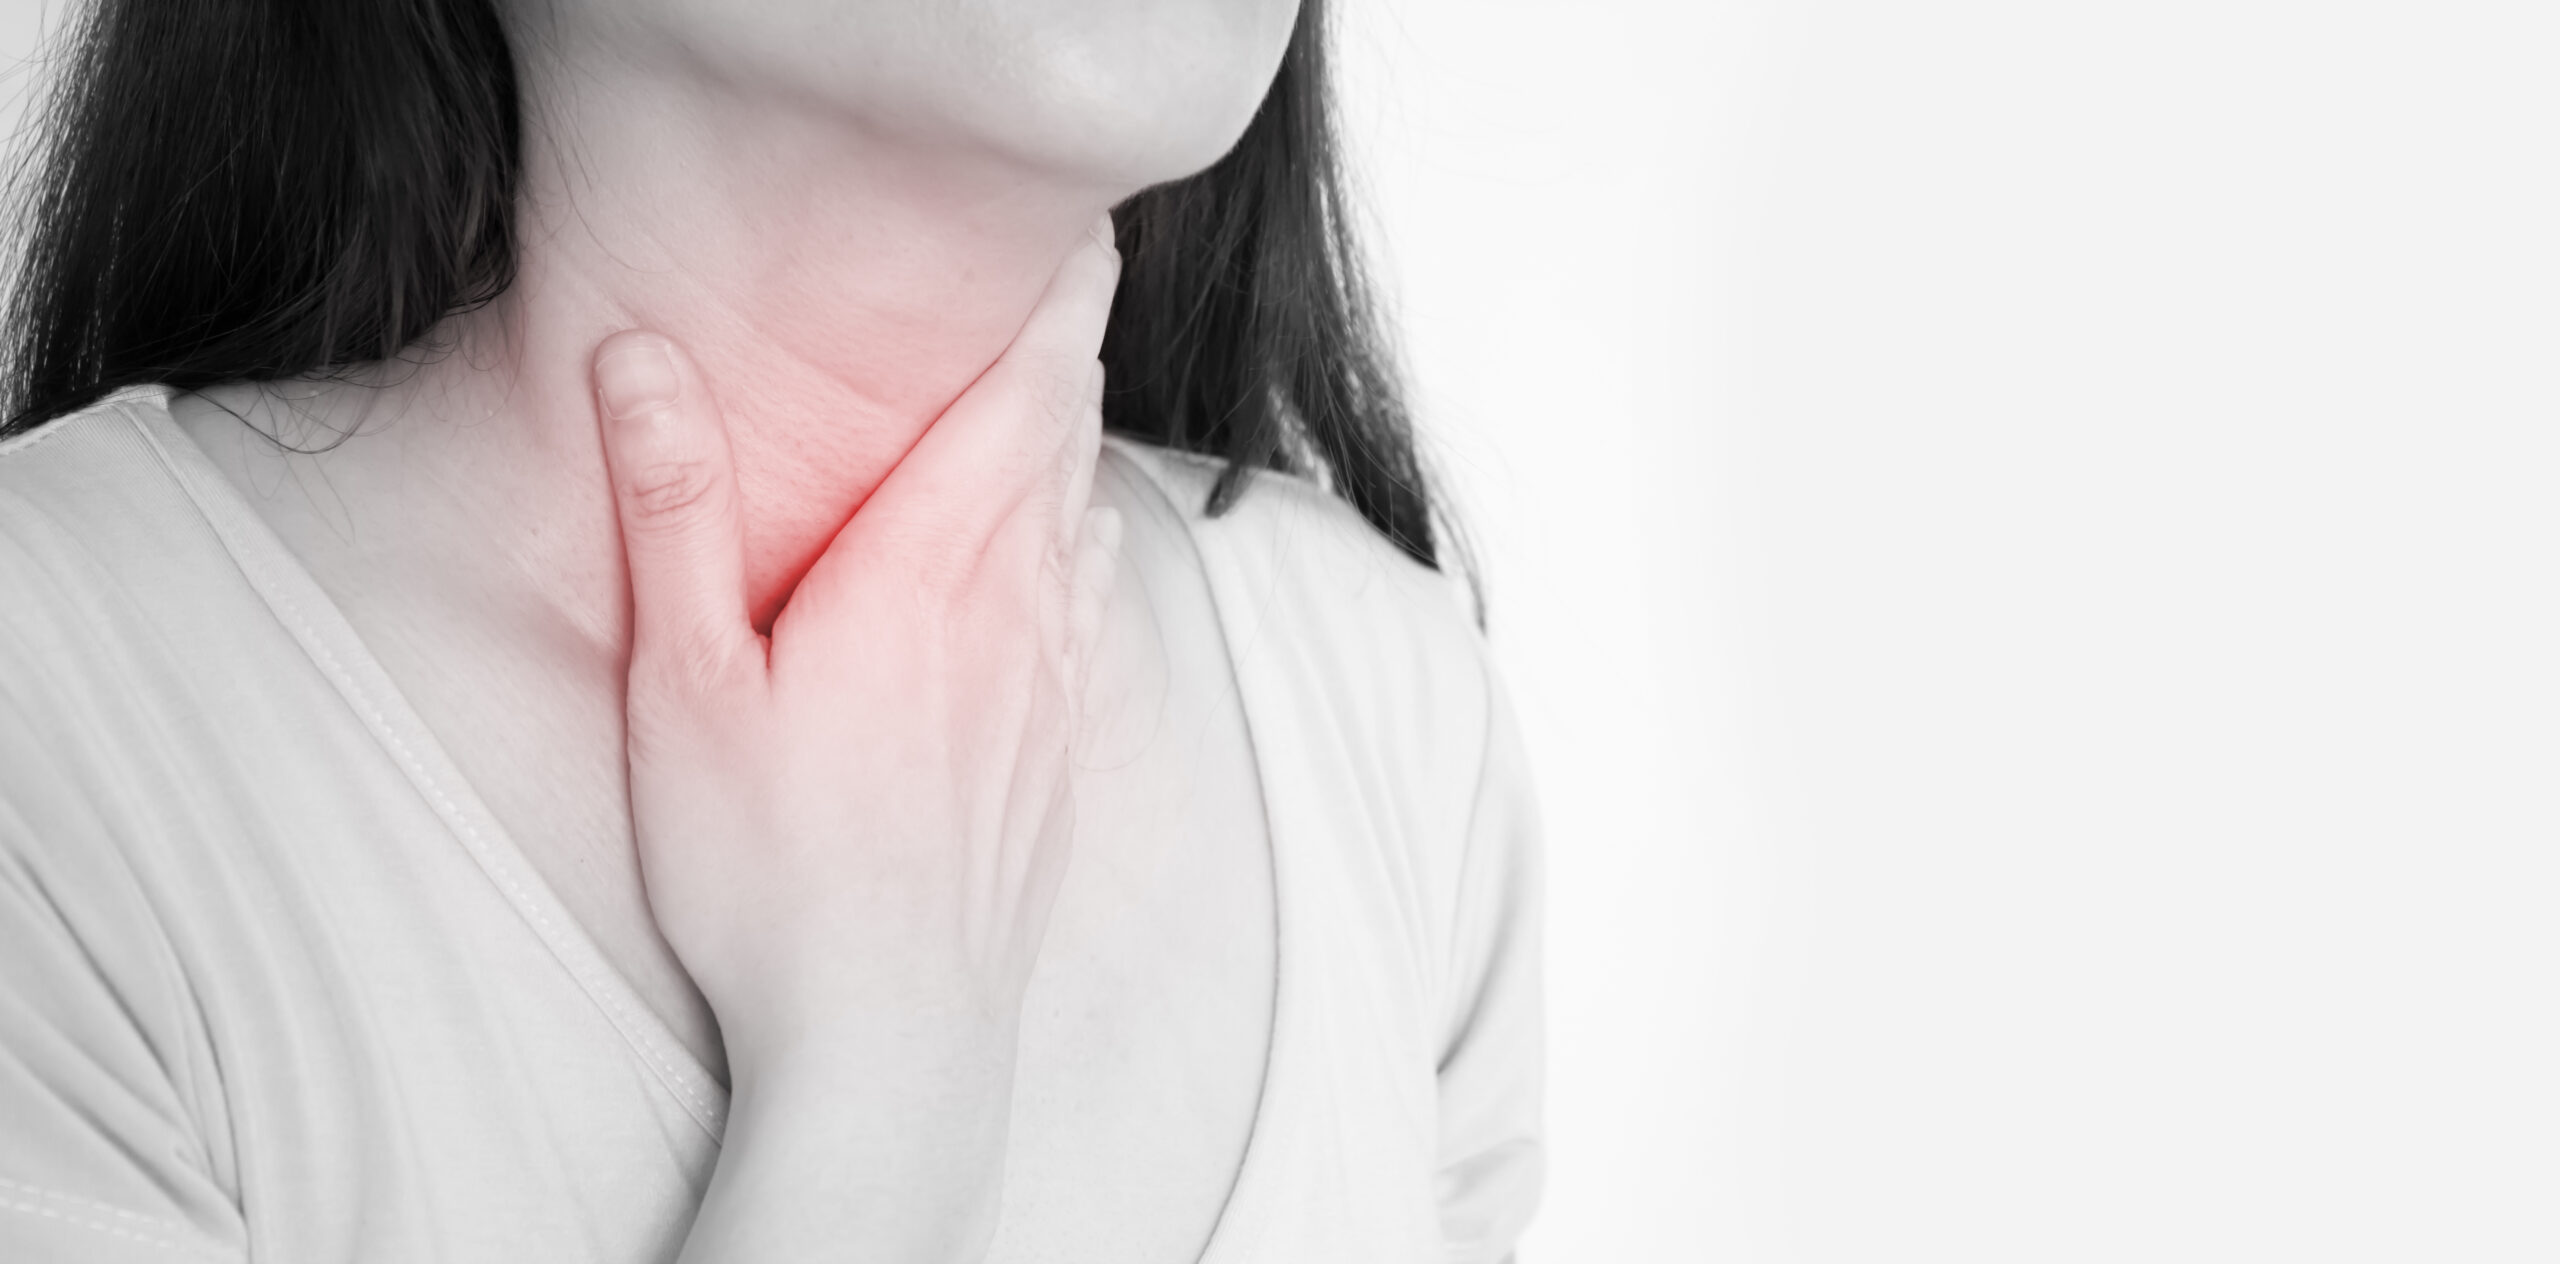 Image of a woman with her hand on her neck/thyroid, representing thyroid cancer awareness and diagnosis